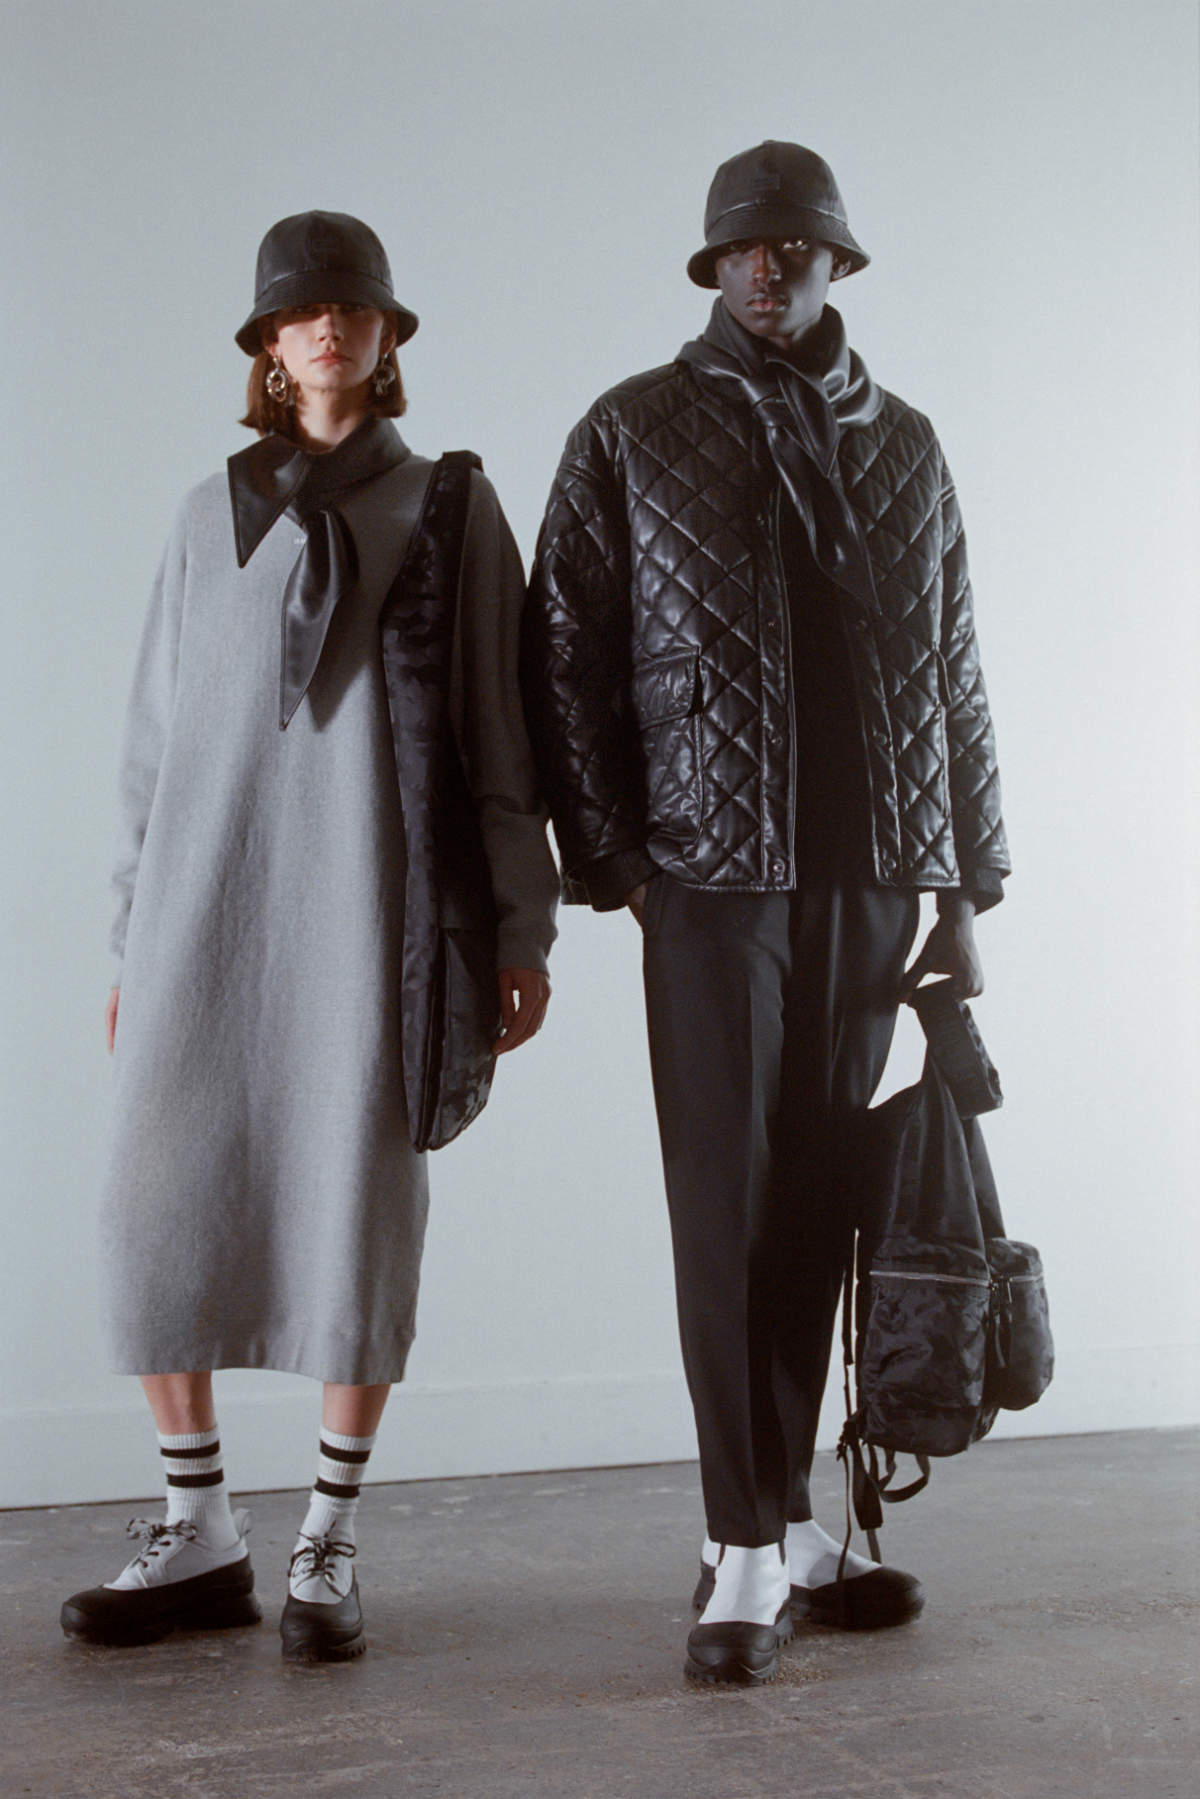 Maison Maison Maison Maison Maison Maison Maison Maison Maison Maison Maison Maison Maison Maison Maison Maison Maison Maison Maison Maison Maison Maison Maison Maison Maison Kitsuné Presents Its New Fall-Winter 2022/23 Collection: Proportion At Play